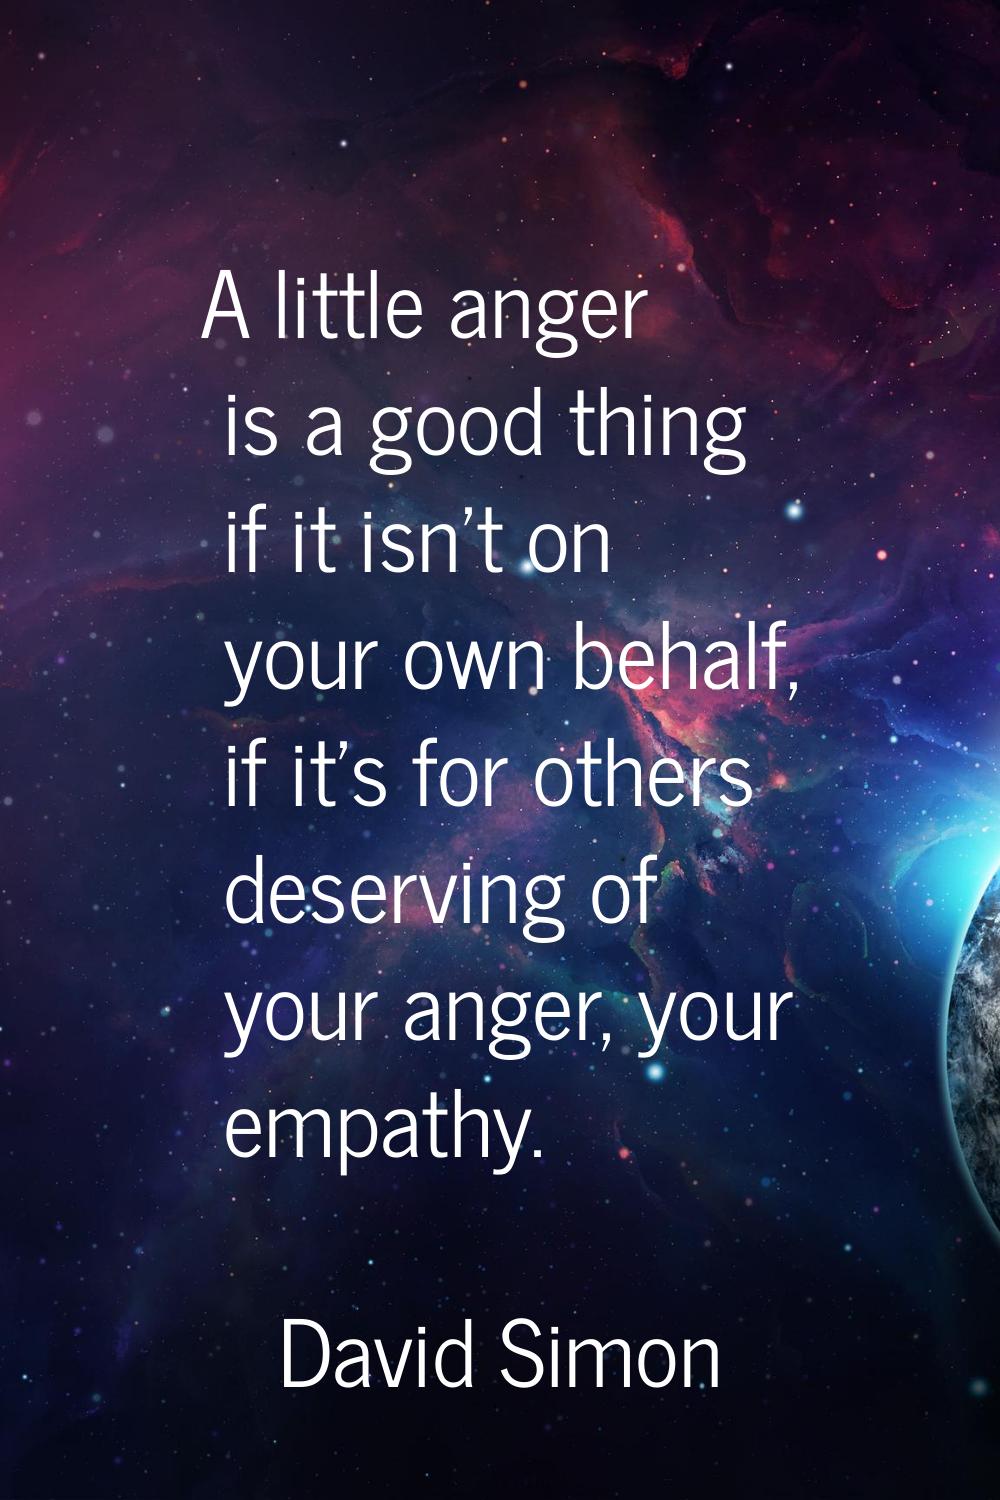 A little anger is a good thing if it isn't on your own behalf, if it's for others deserving of your